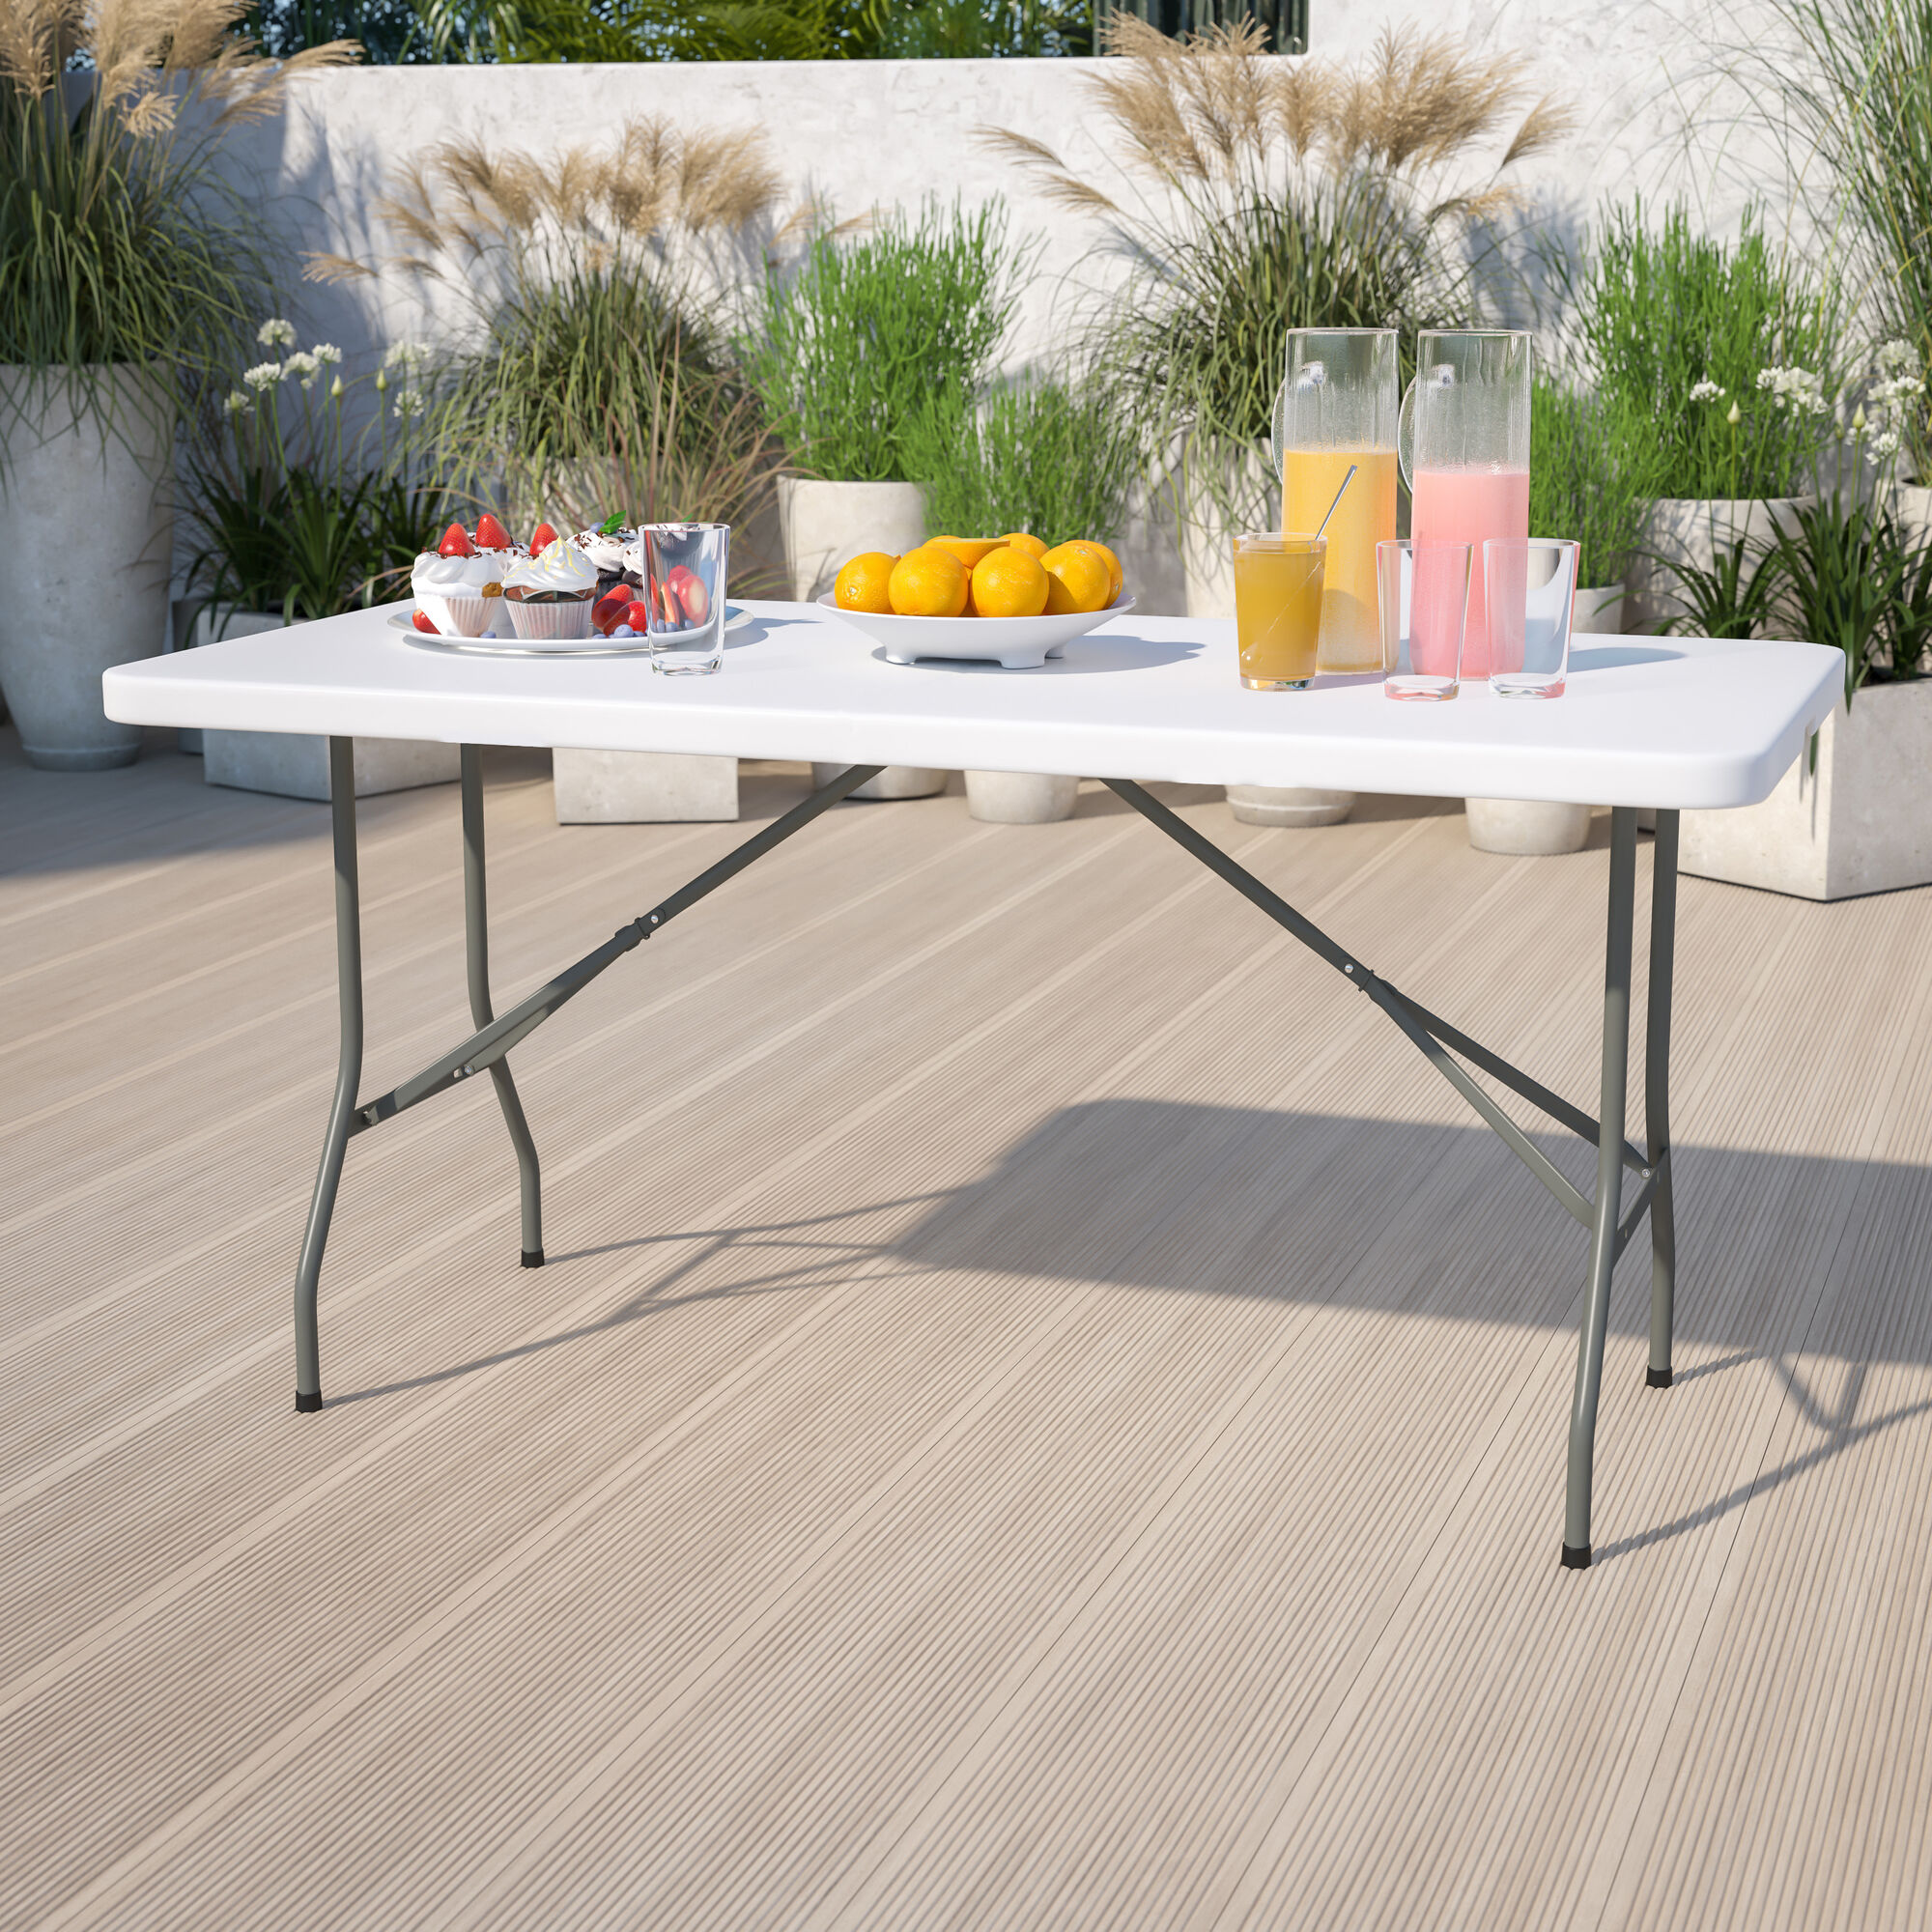 The Beauty of Simplicity: How Plastic Folding Table Tabletops Make Maintenance Effortless